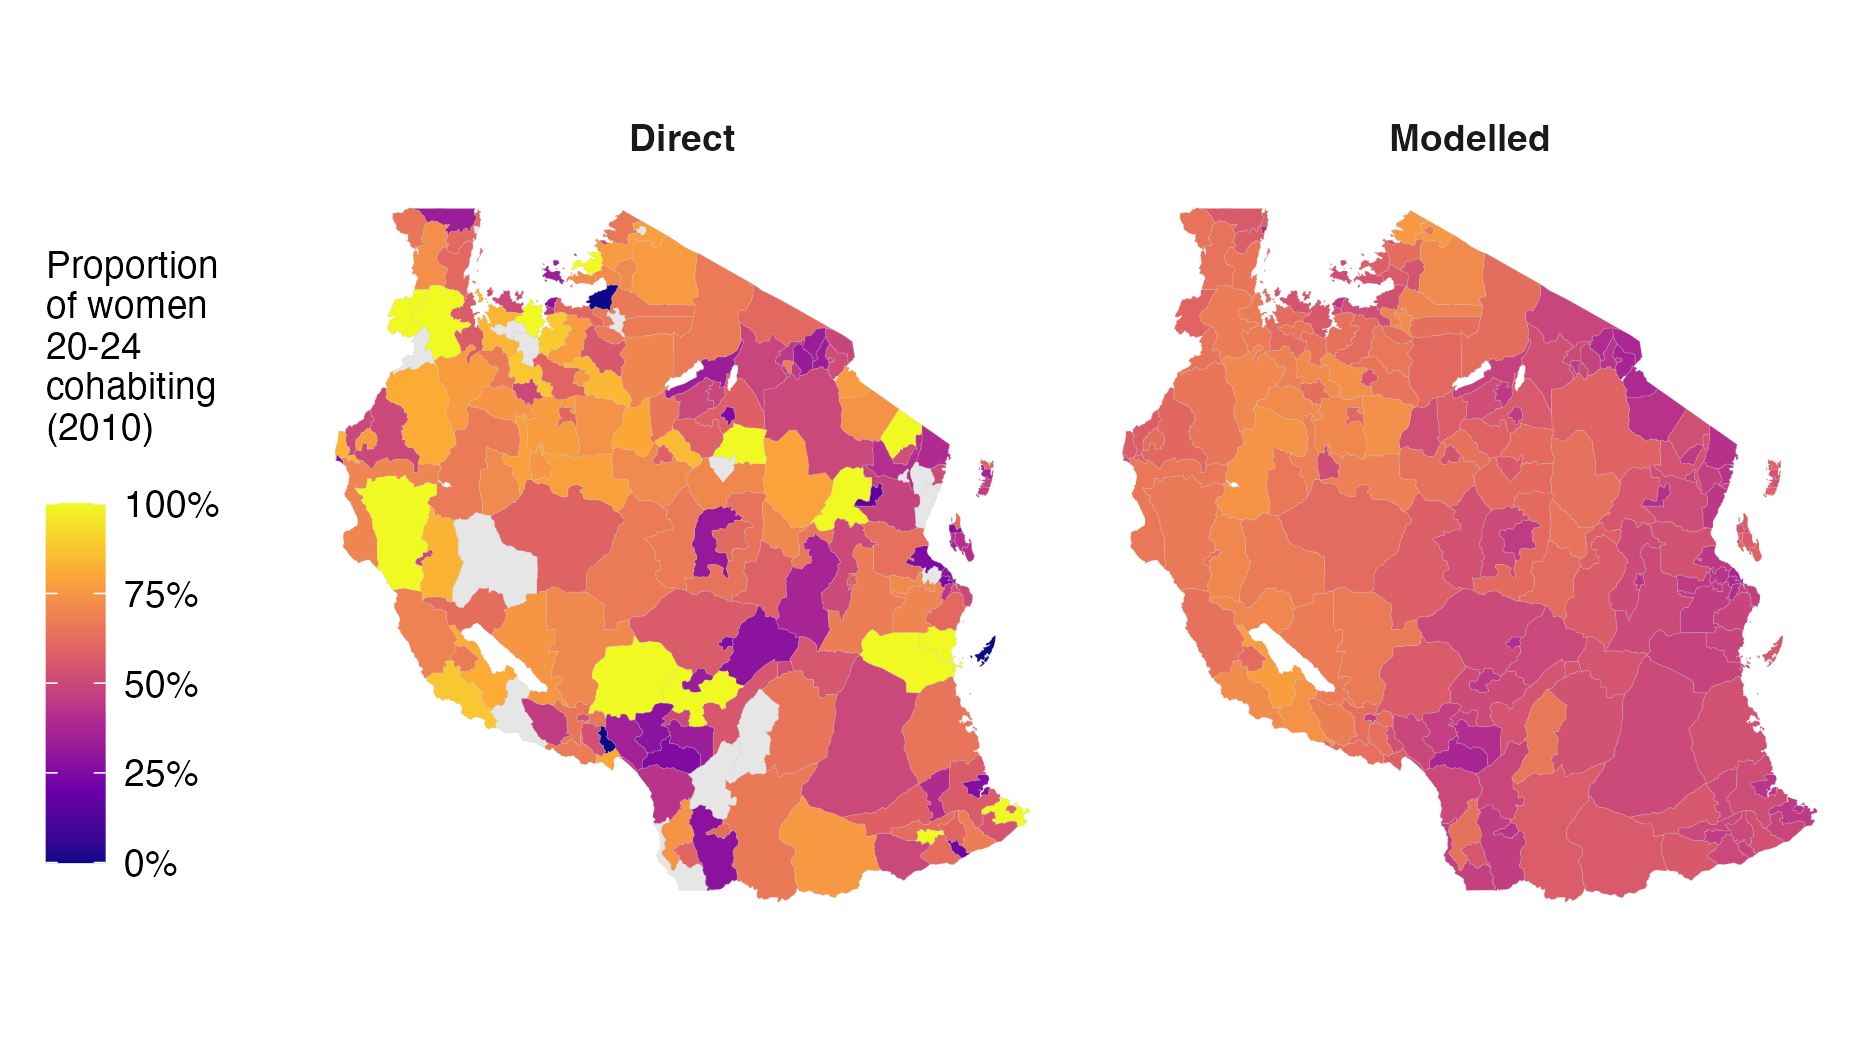 Even without real covariates, small-area estimation is doing something useful. The direct estimates are very noisy due to their small sample sizes. Furthermore, some districts have no survey clusters. These issues are alleivated using simple smoothing.